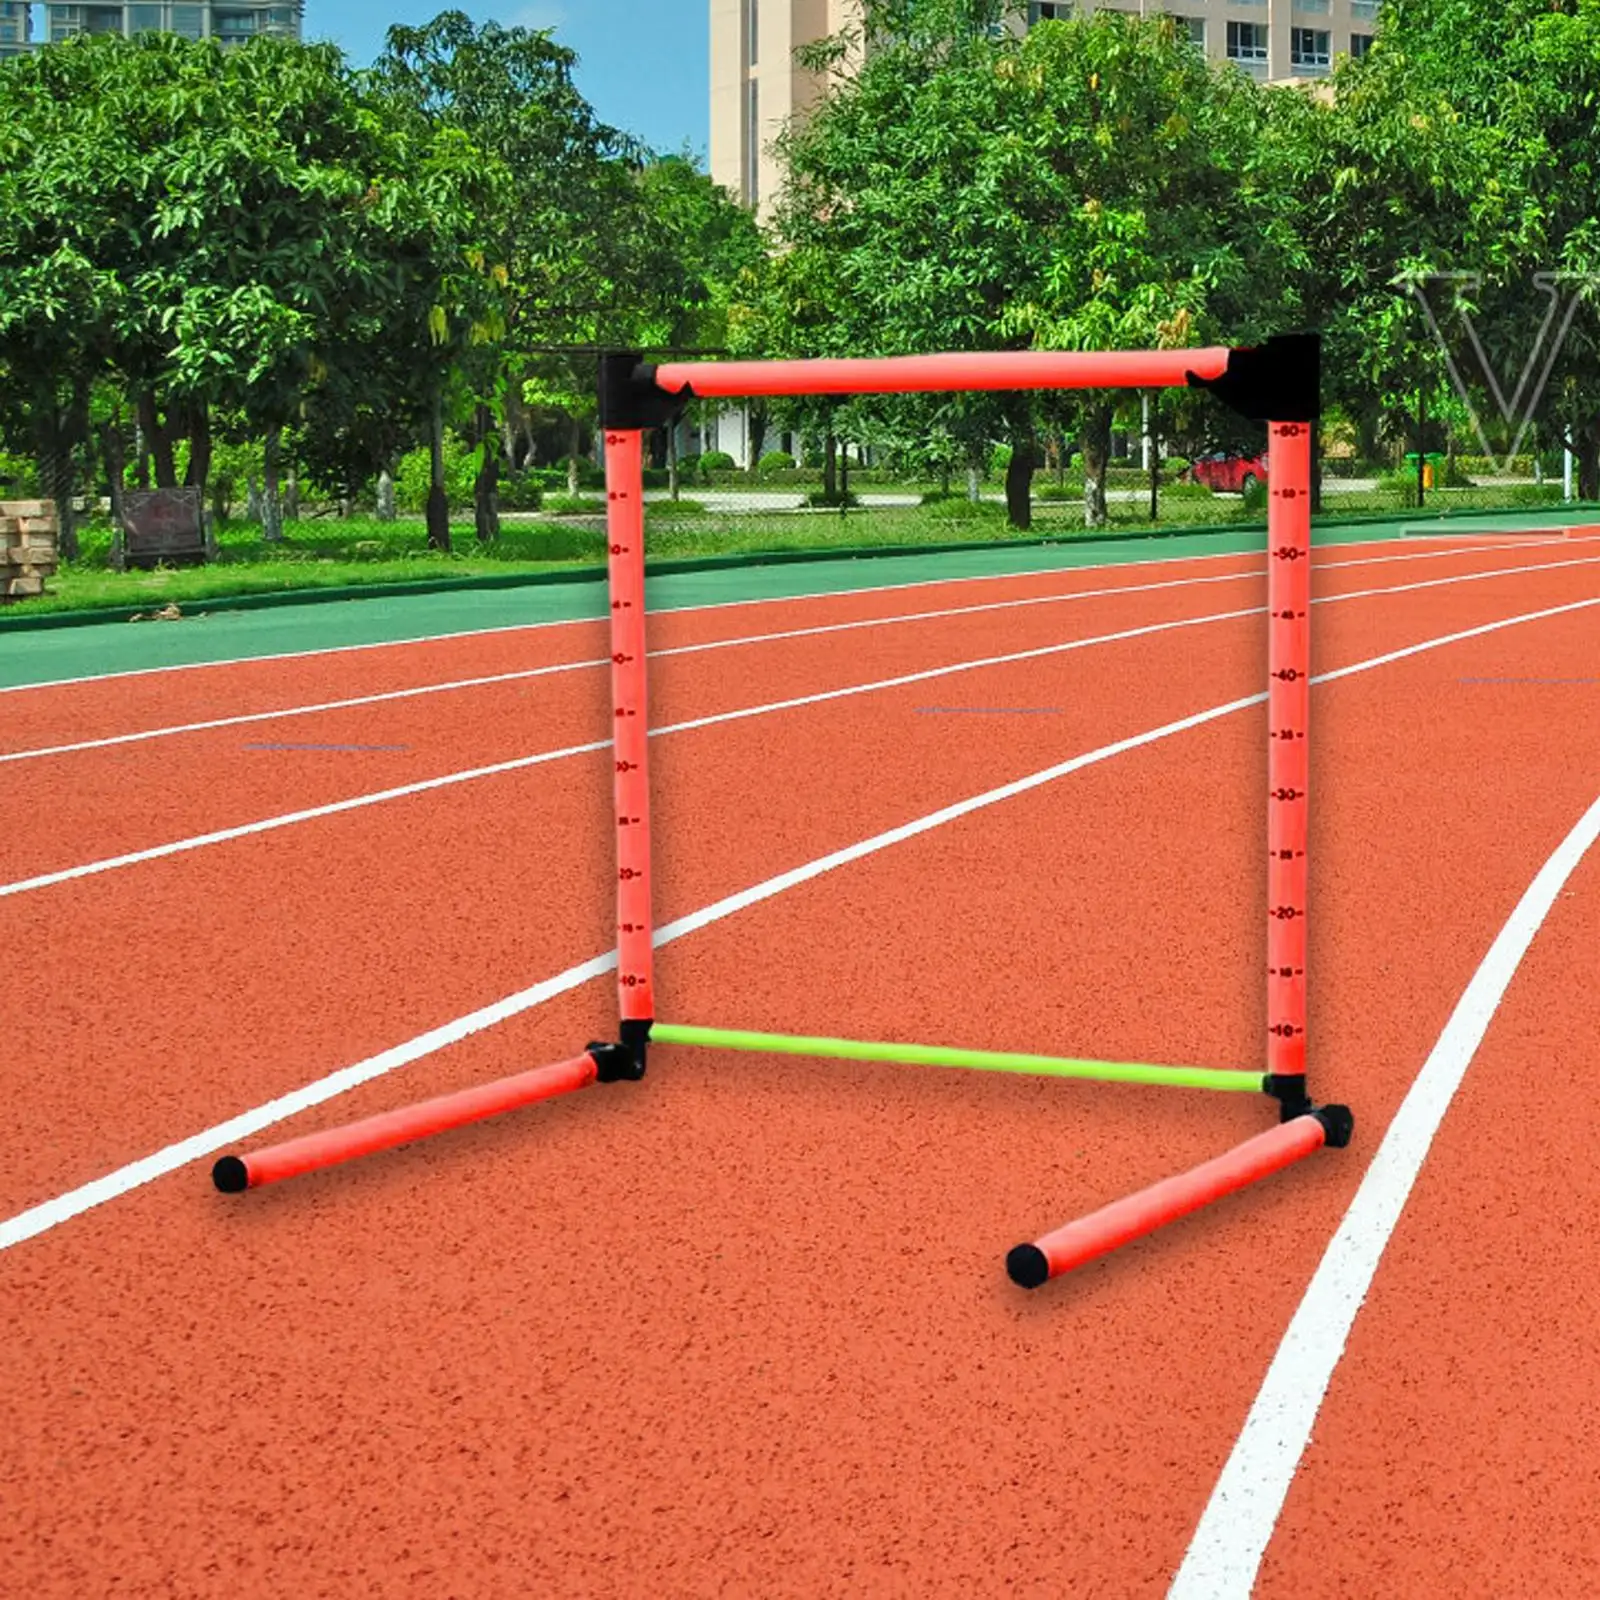 Agility Training Hurdles Adjustable Scale Agility Speed Training Equipment for Soccer Hurdle Training Athletes Workout Jumping